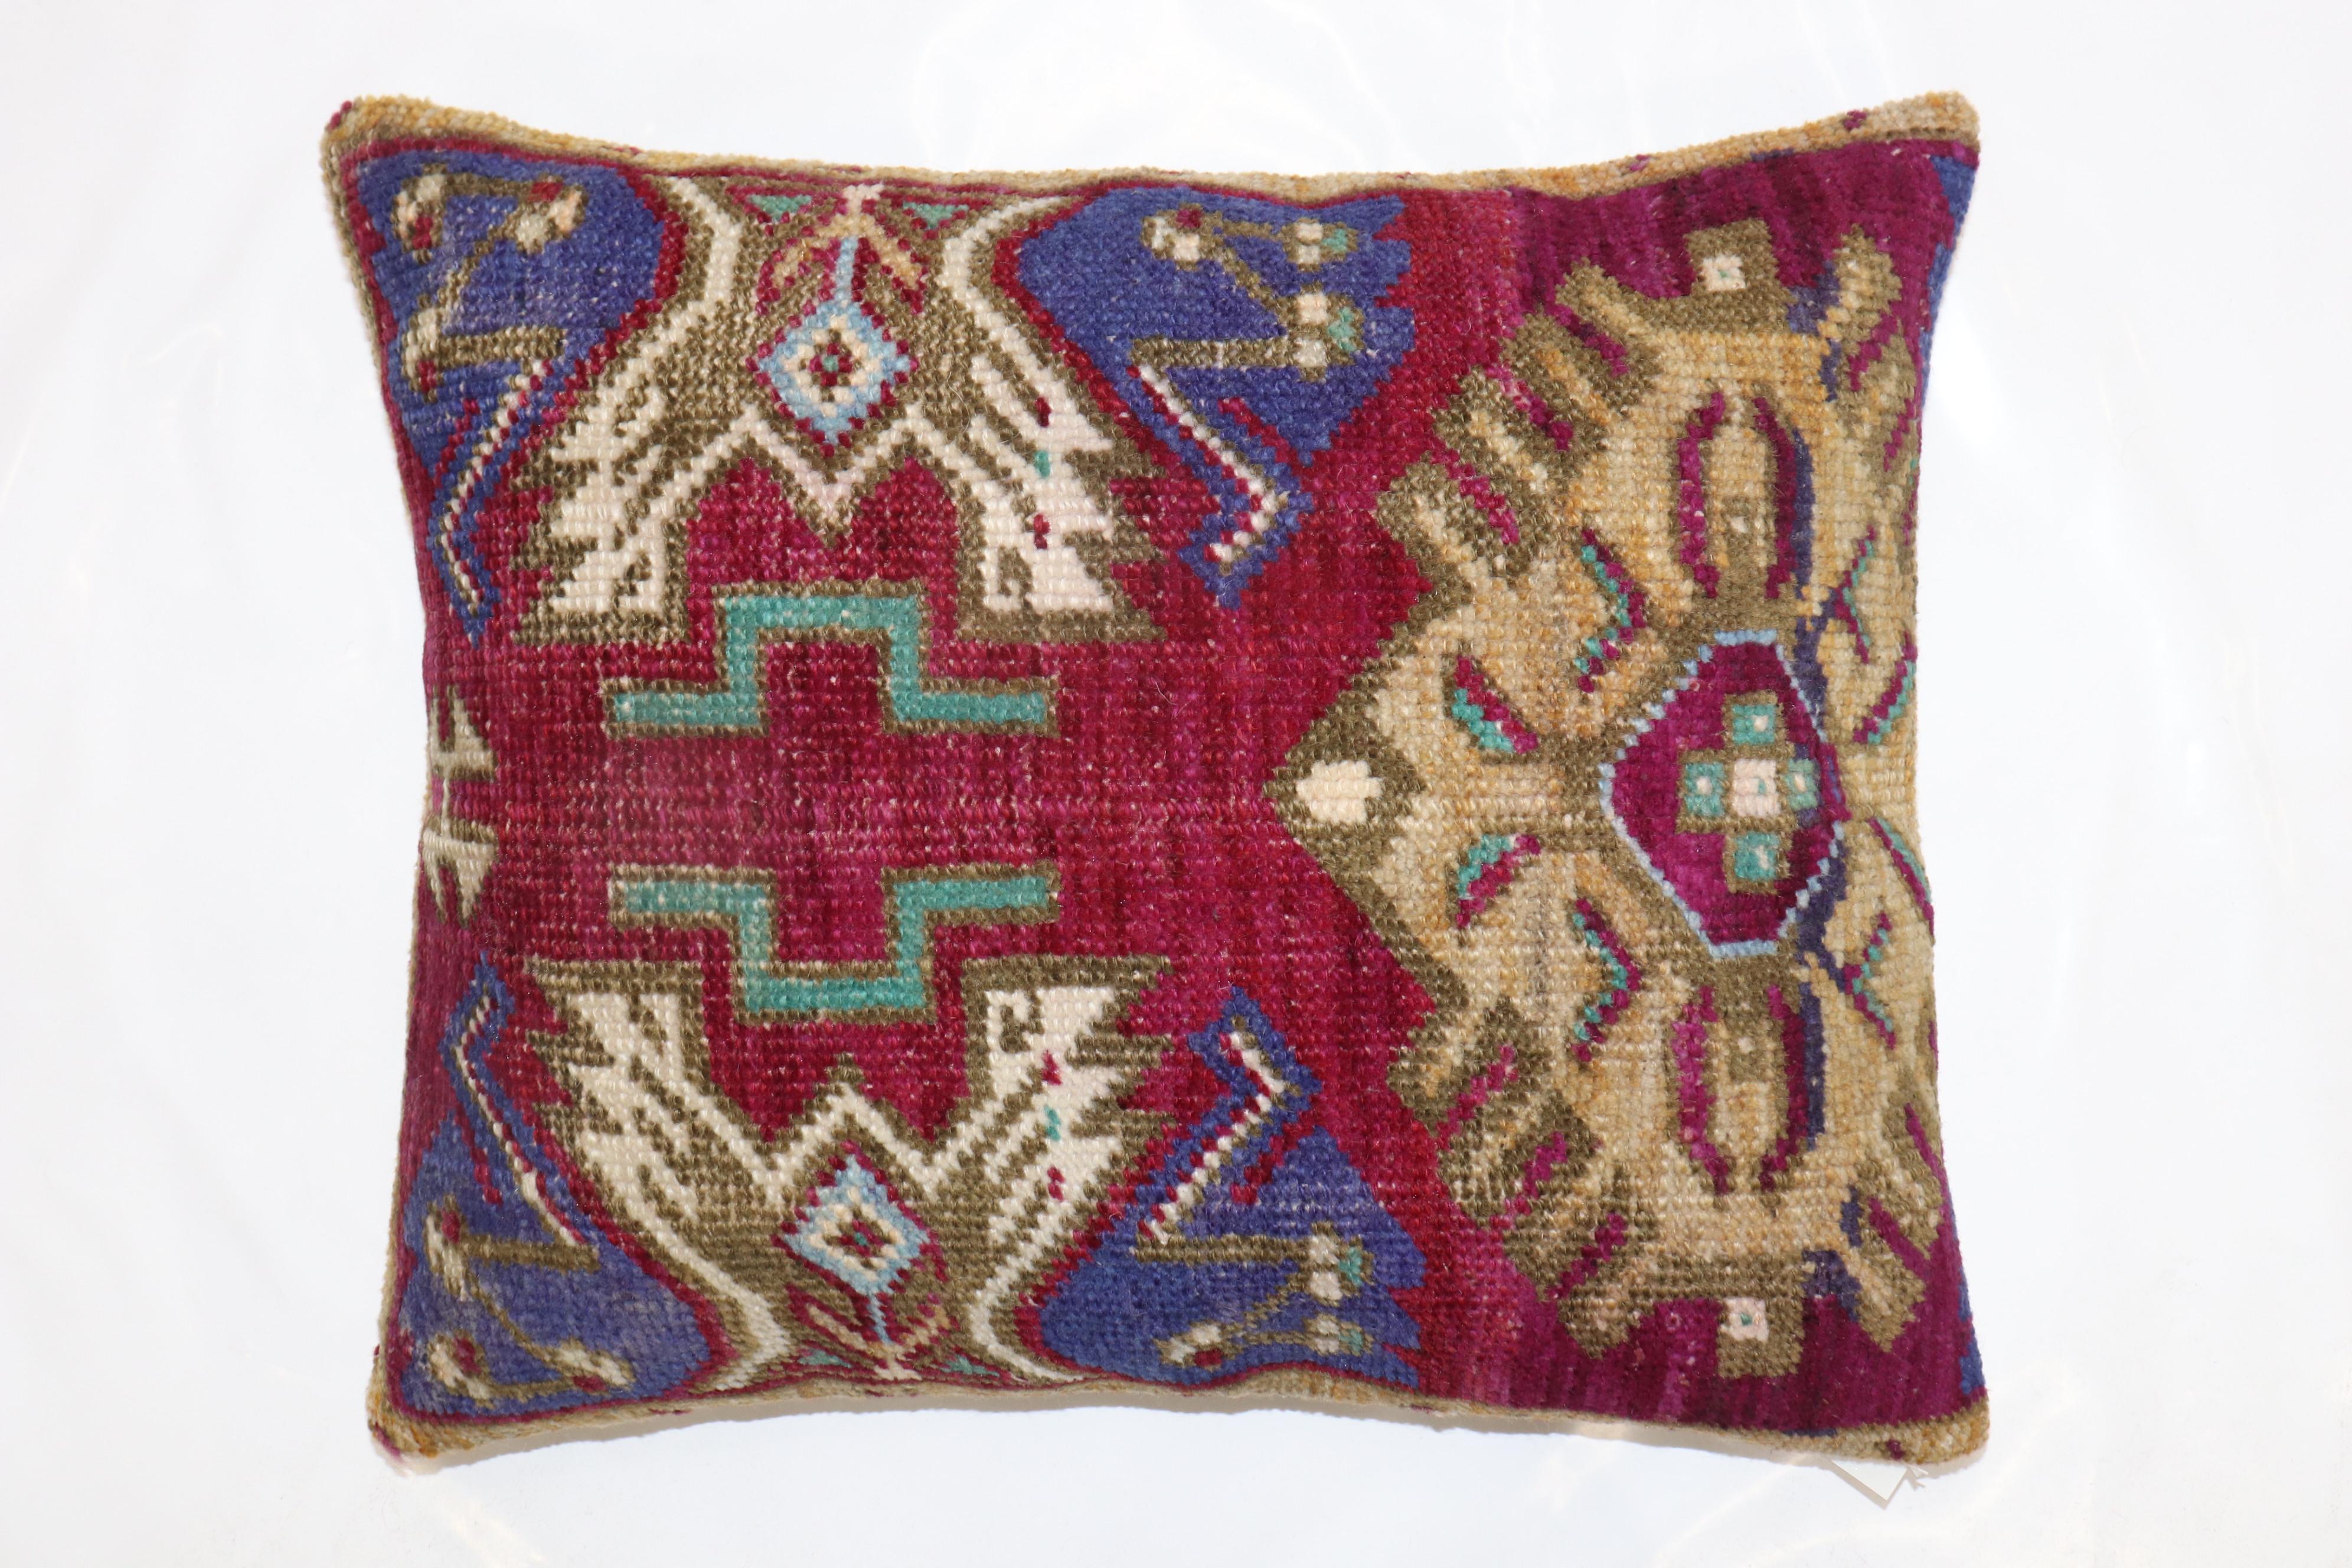 Pillow made from a Vintage Turkish rug. Zipper closure and poly fill provided

Measures: 18'' x 22''.